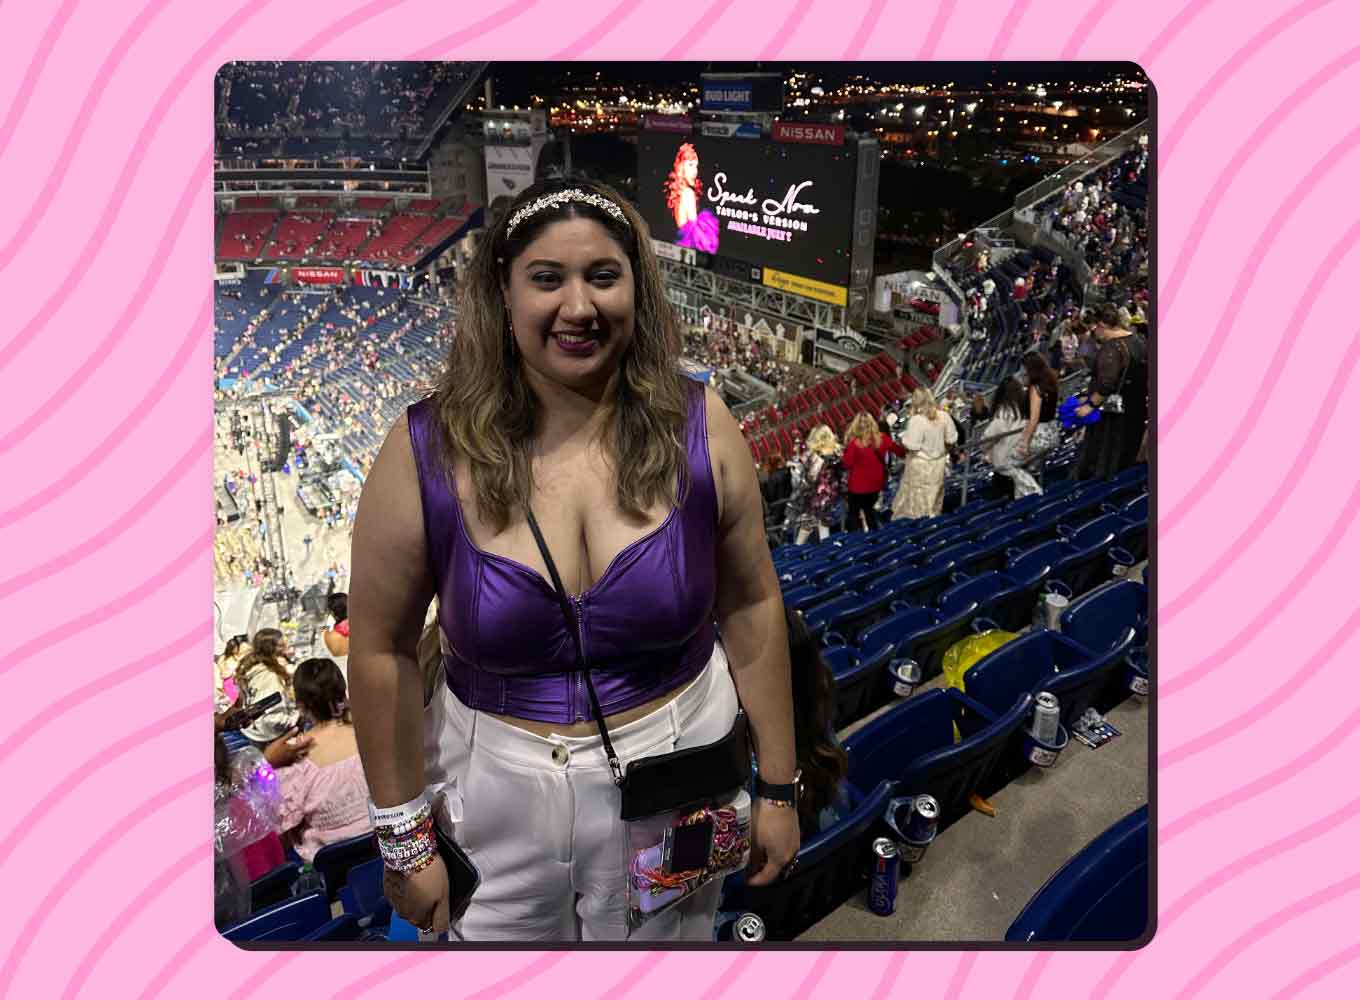 Alyssa Monreal wears a purple tank top and sparkly headband at the Eras Tour